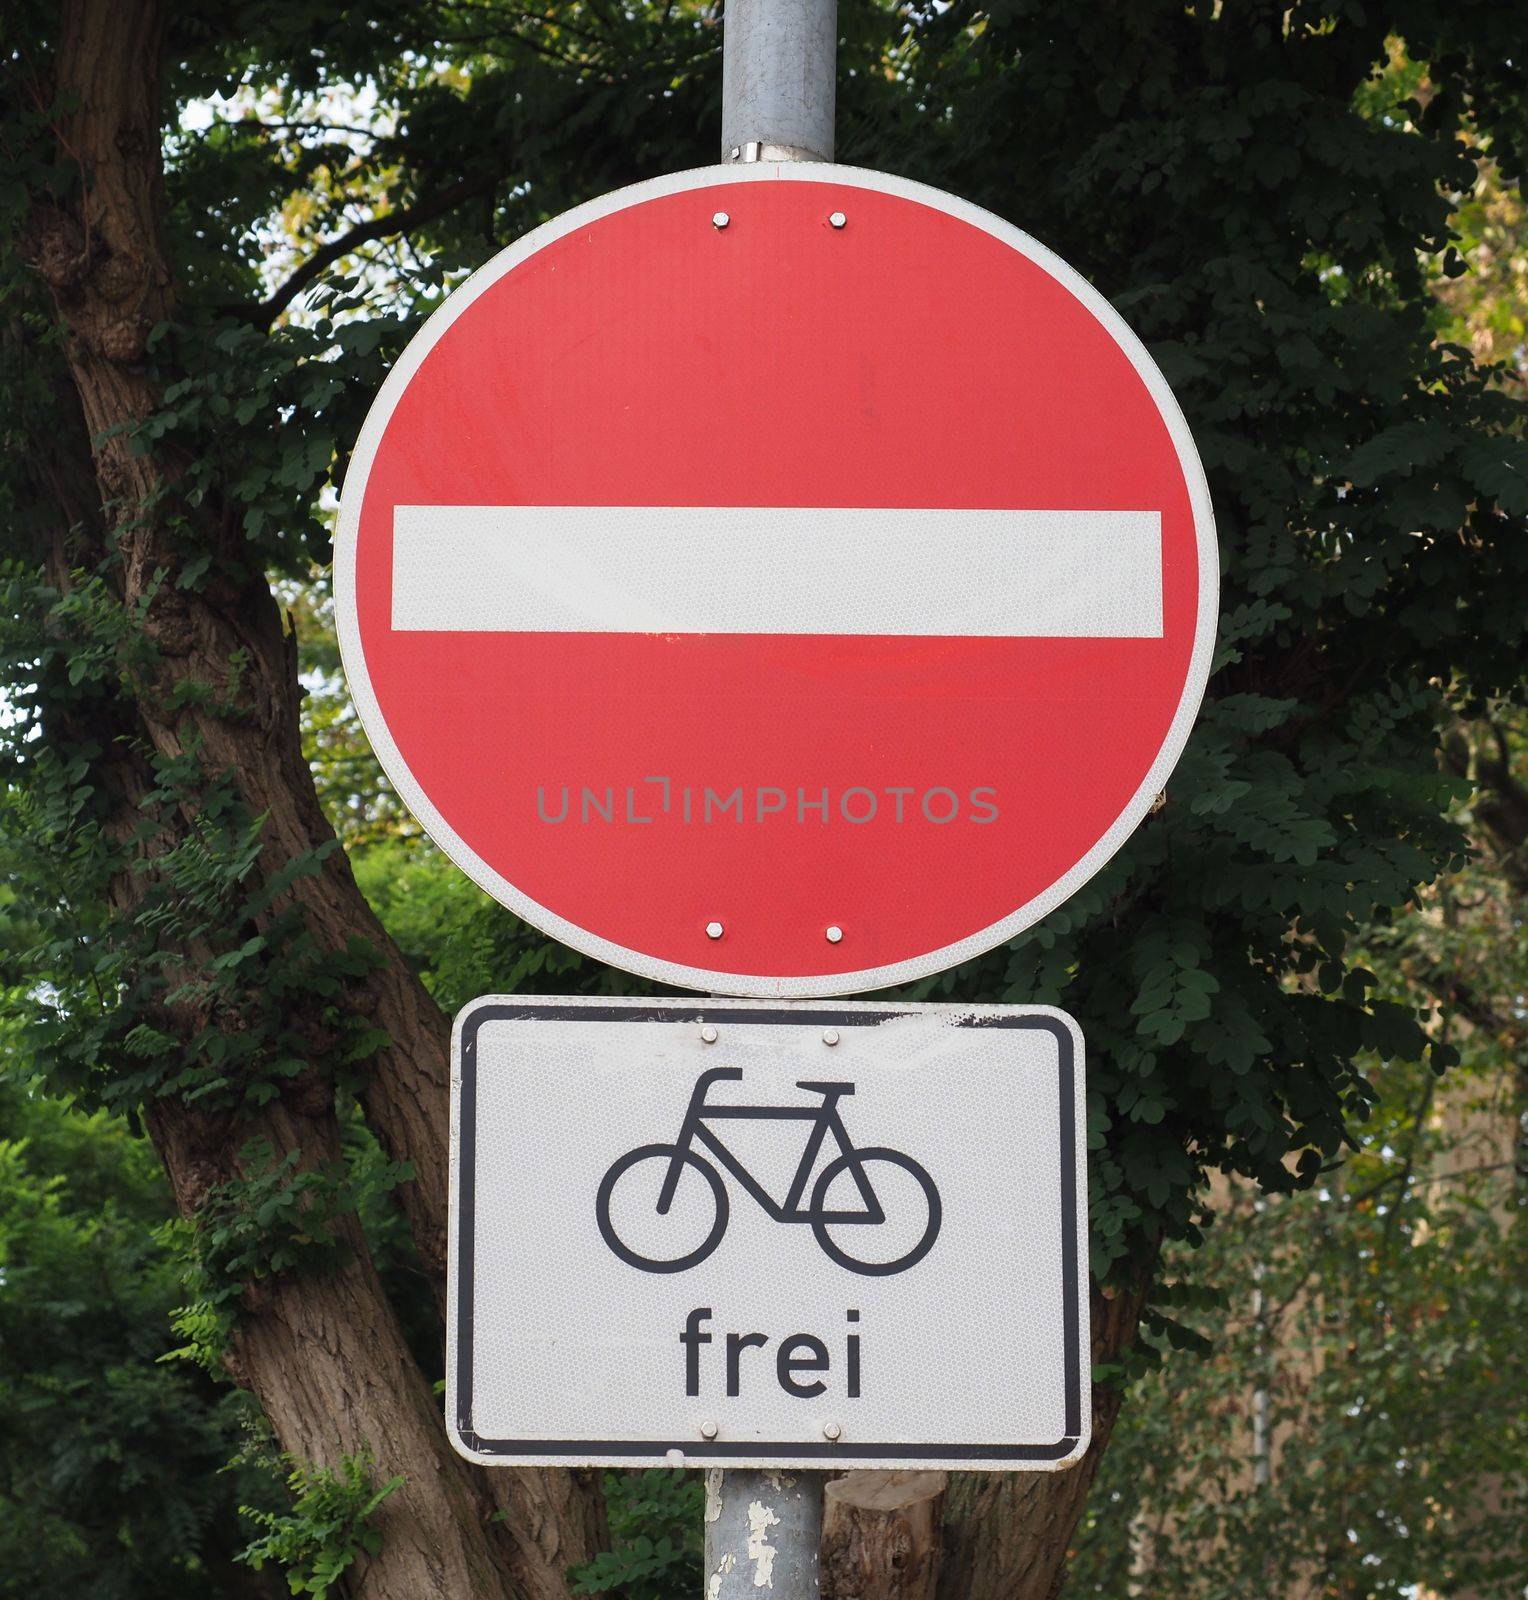 Regulatory signs, no entry for vehicular traffic sign (frei means that bicycles are allowed)